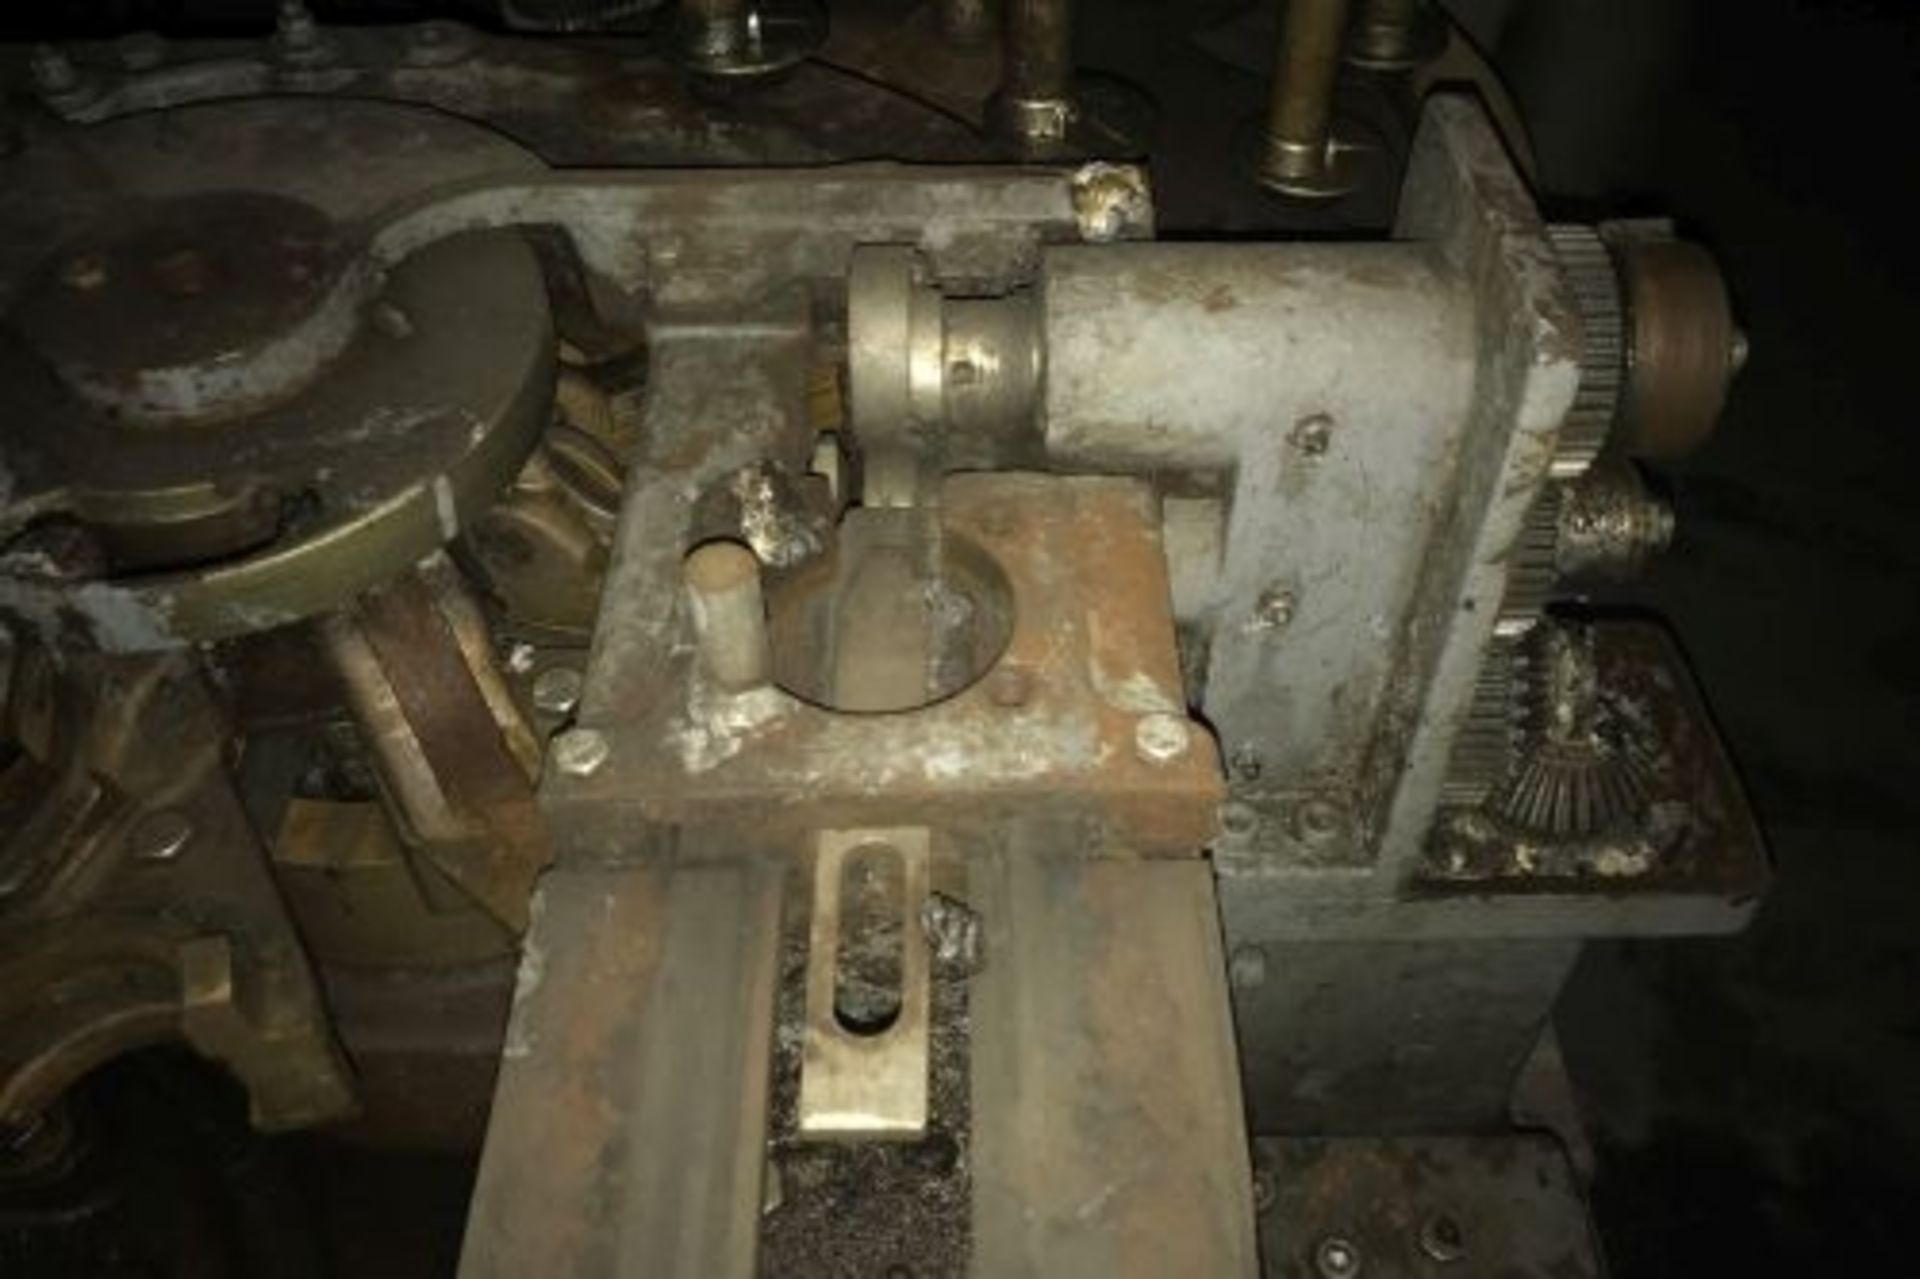 Angelus model 40P four head can closing machine - Image 10 of 12